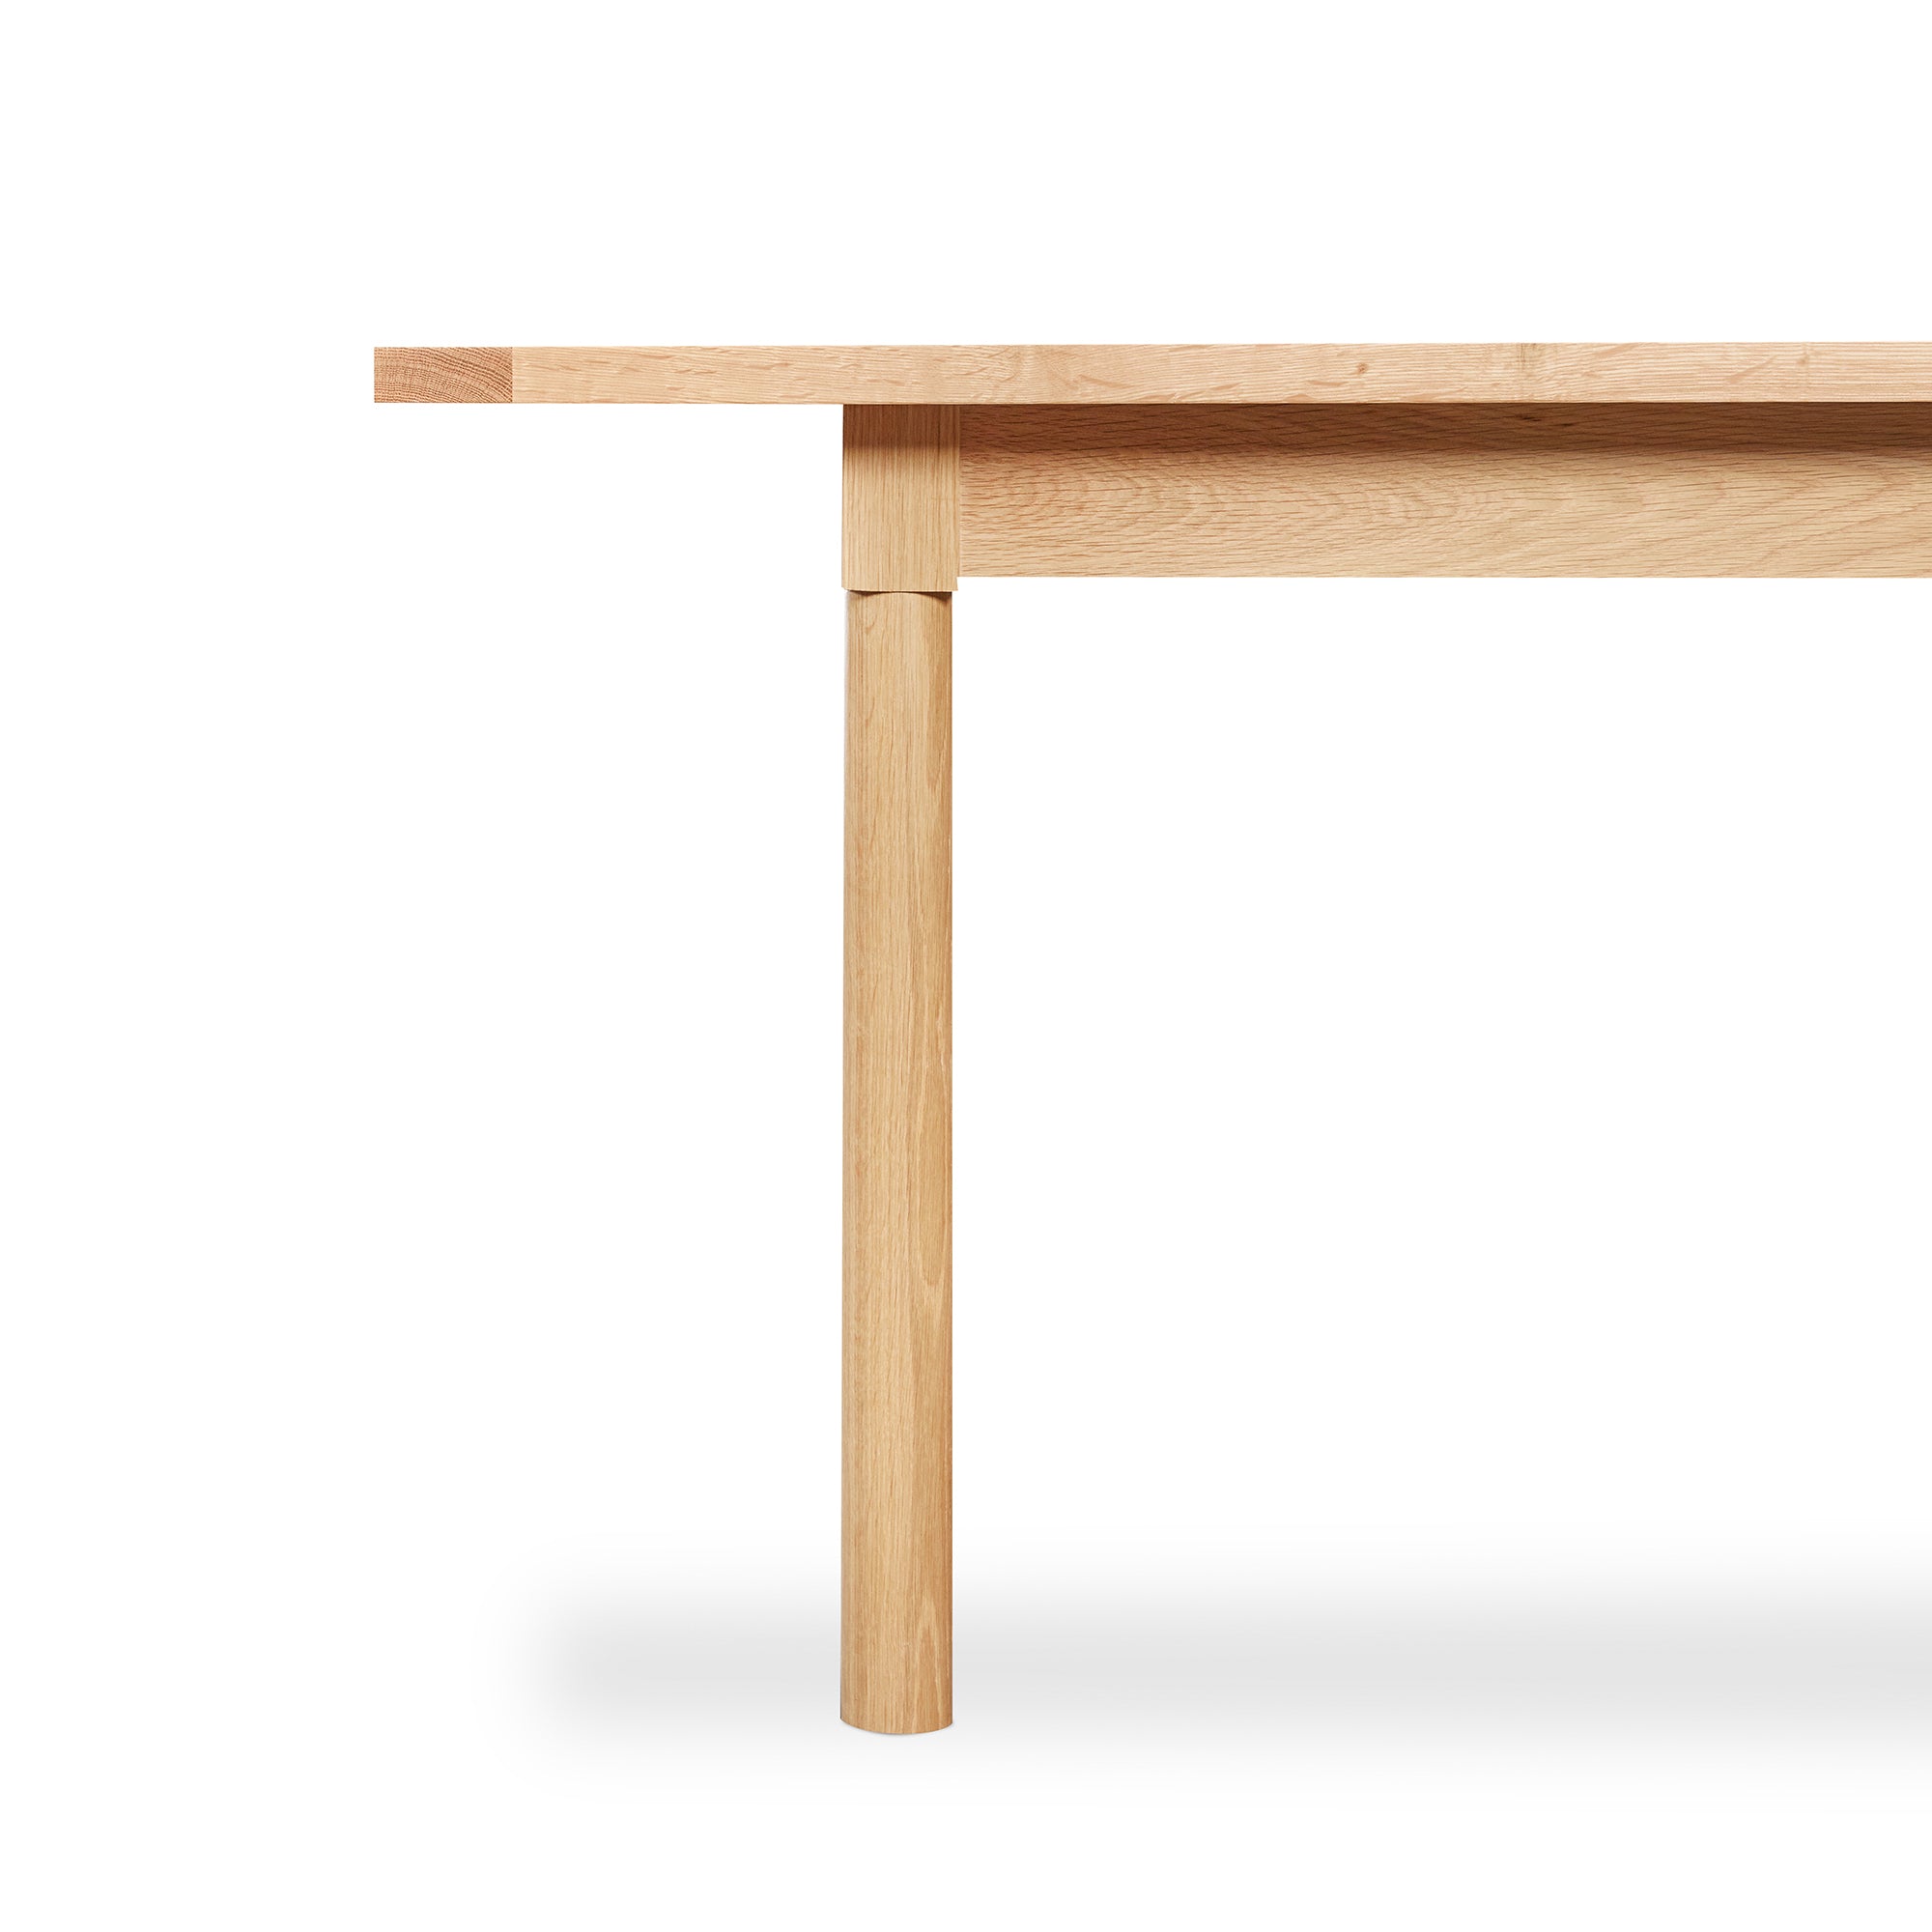 Detailed look of straight turned legs on Revelry dining table